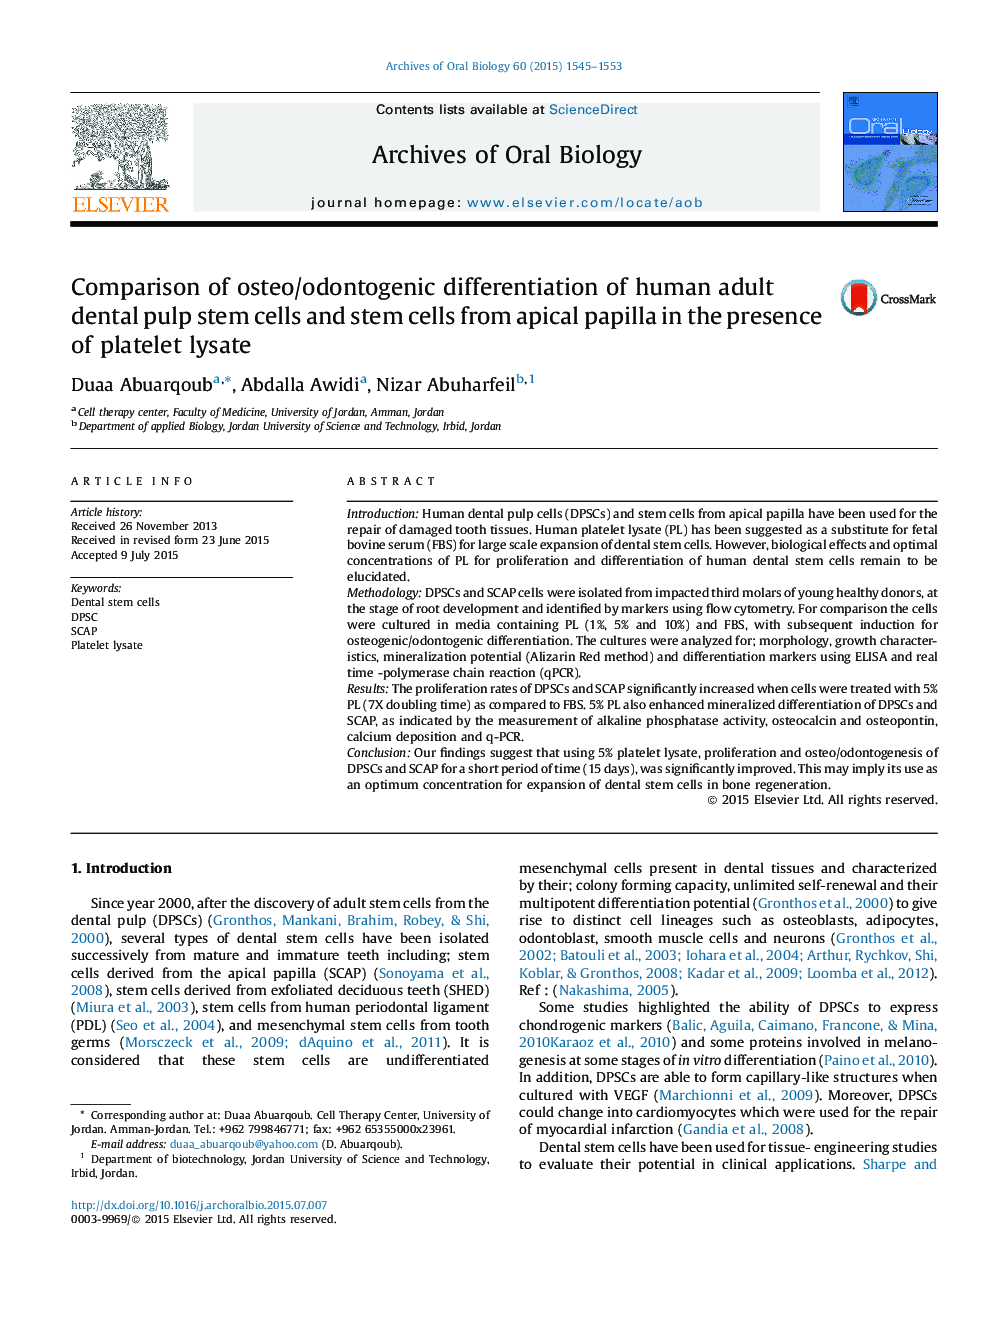 Comparison of osteo/odontogenic differentiation of human adult dental pulp stem cells and stem cells from apical papilla in the presence of platelet lysate